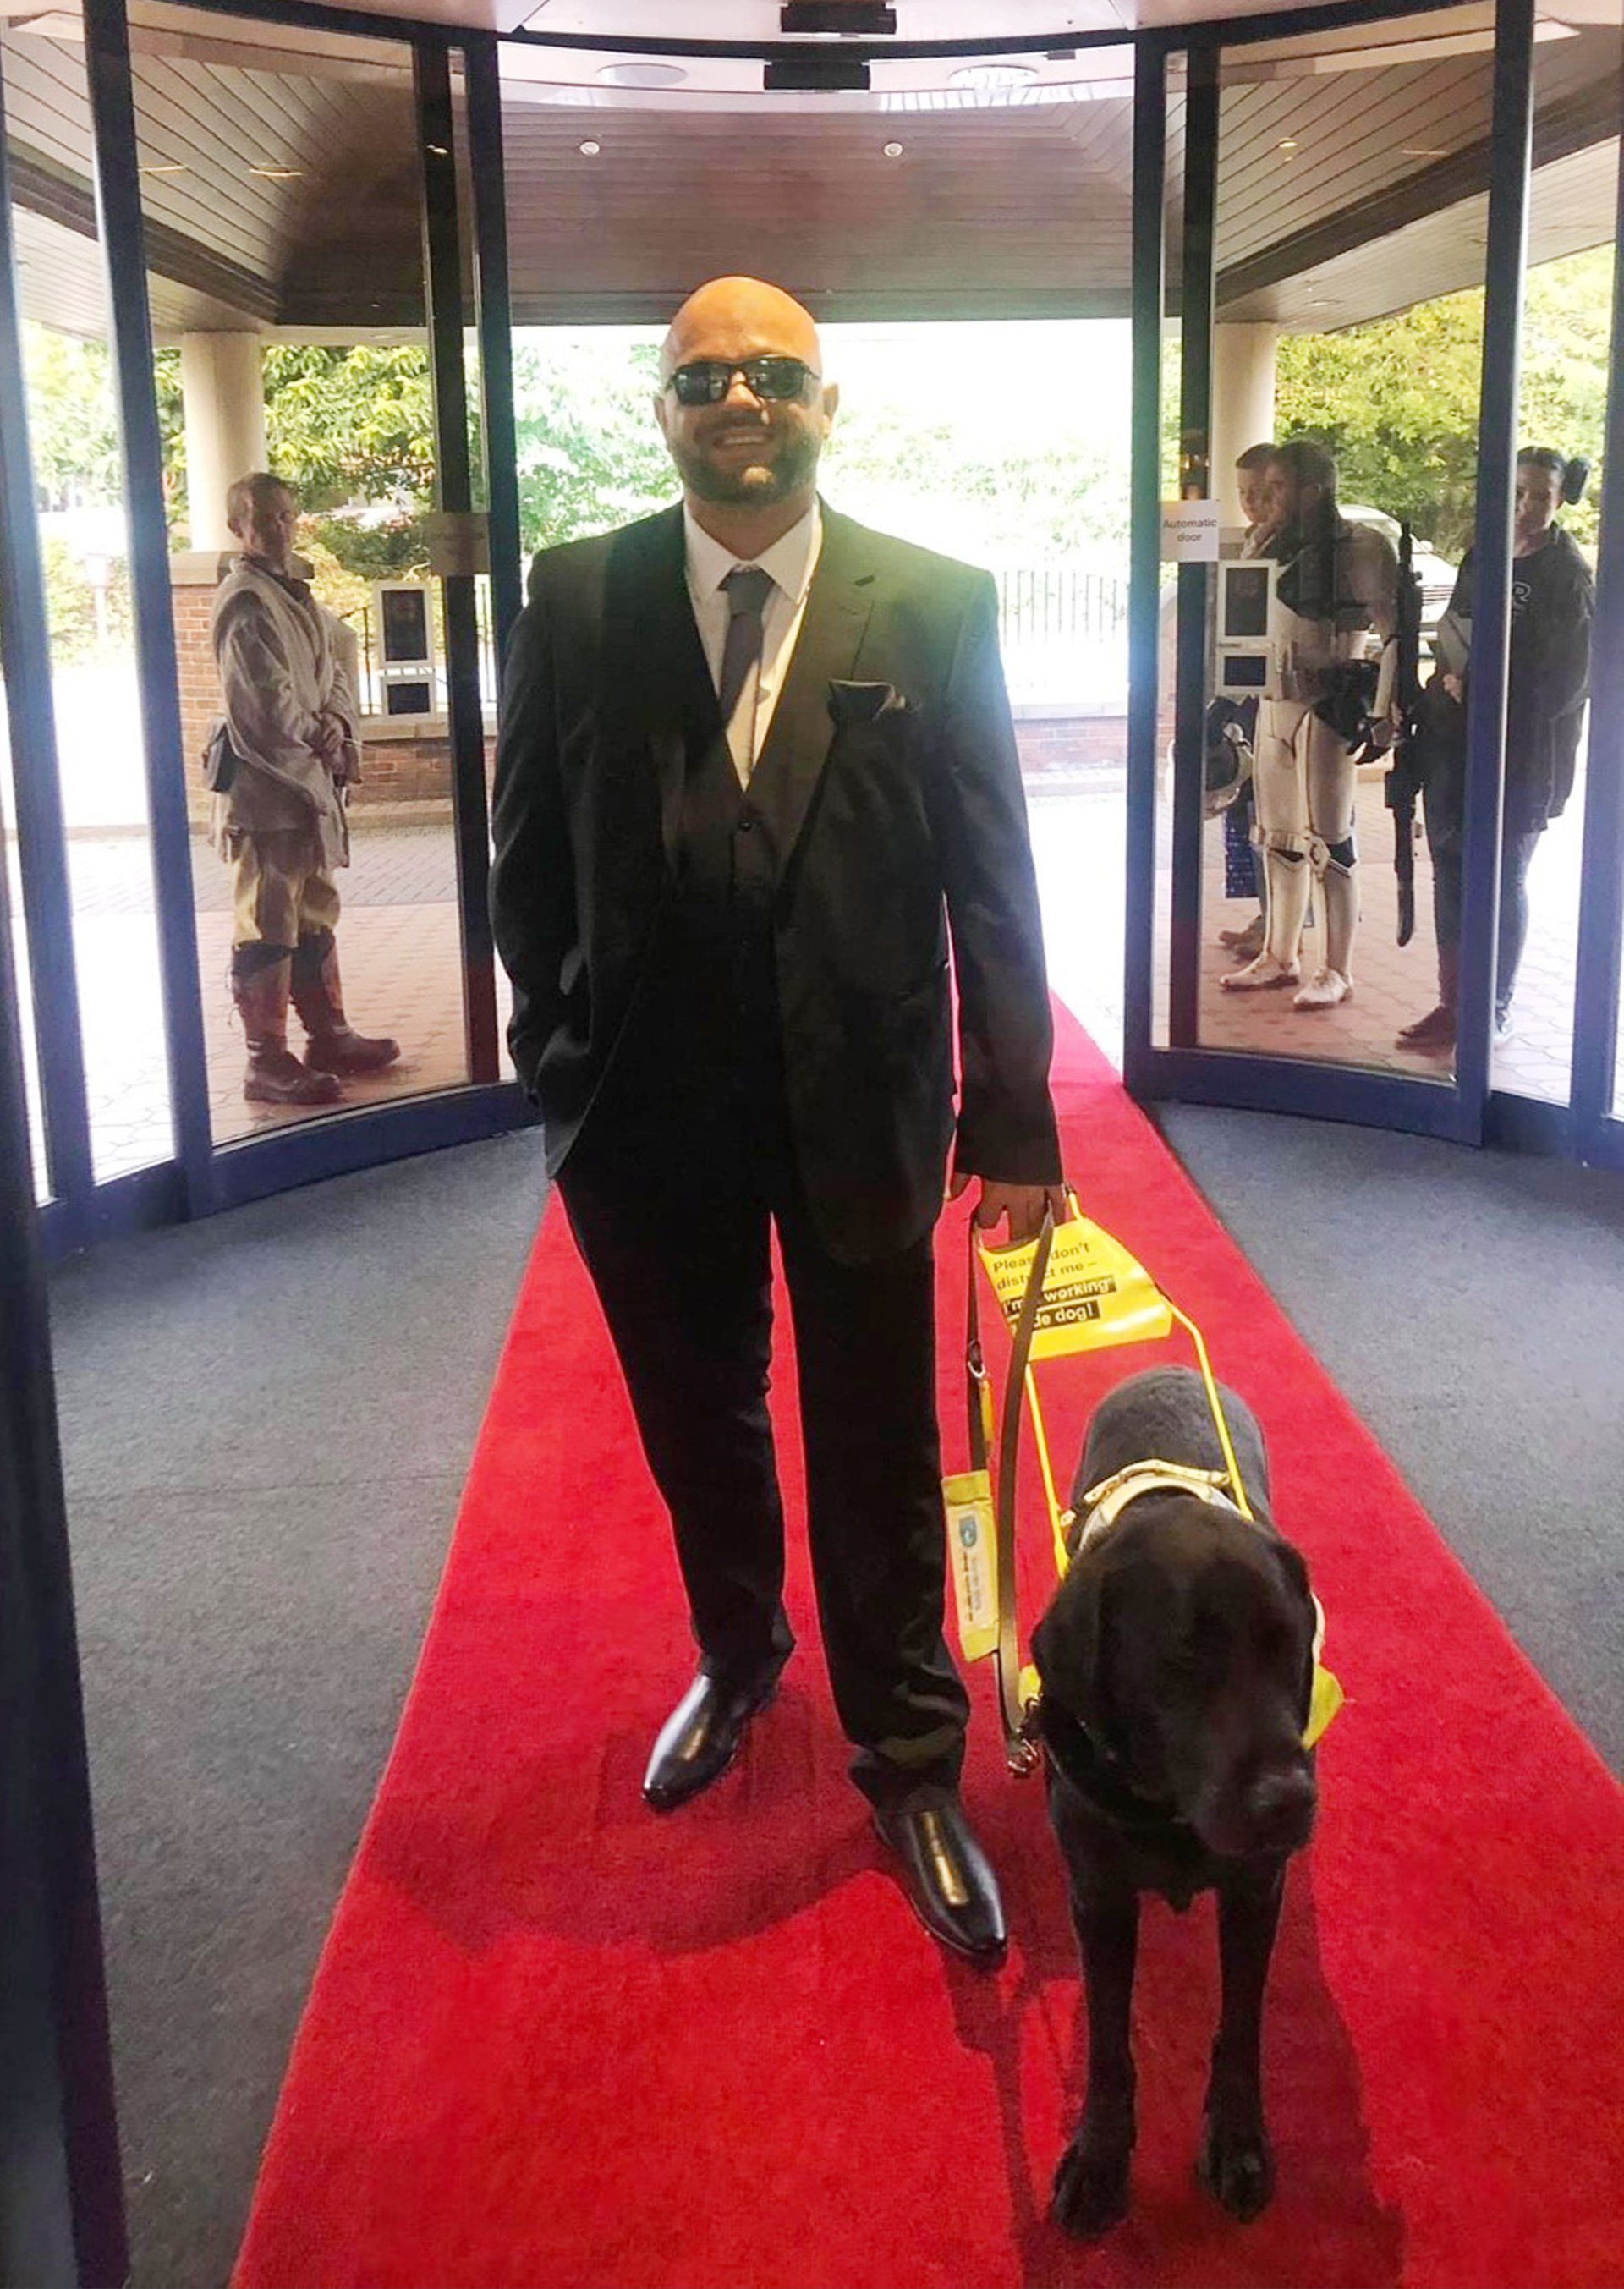 Wayne Pugh posing with his guide dog Vince on the red carpet for Our Staffordshire Heroes Awards